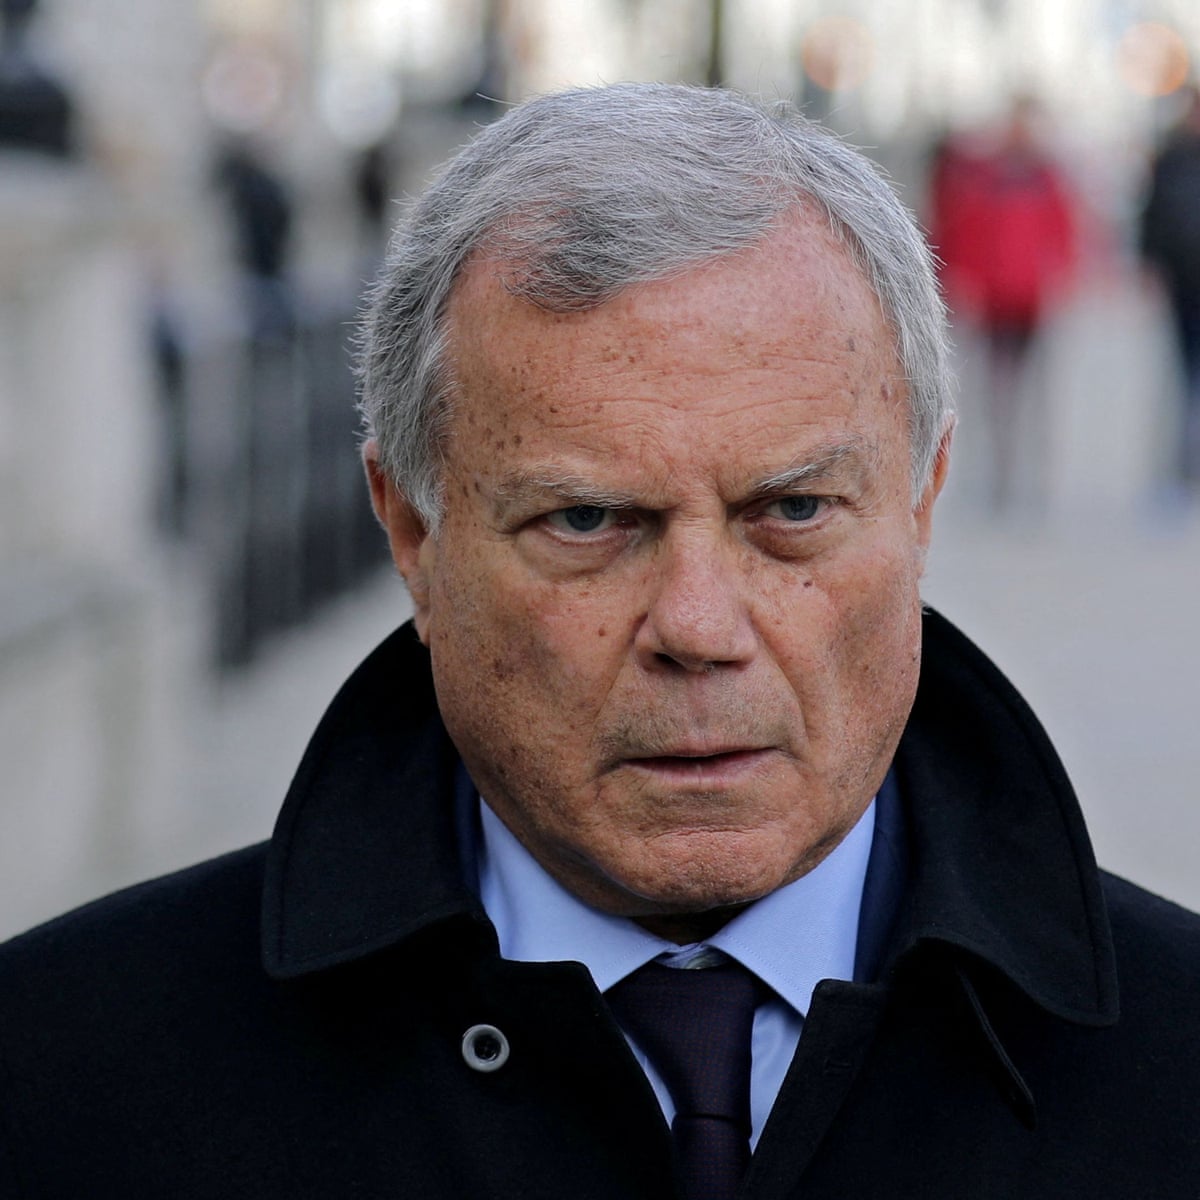 Share price of Martin Sorrell's S4 Capital fall again after auditor delay |  S4 Capital | The Guardian